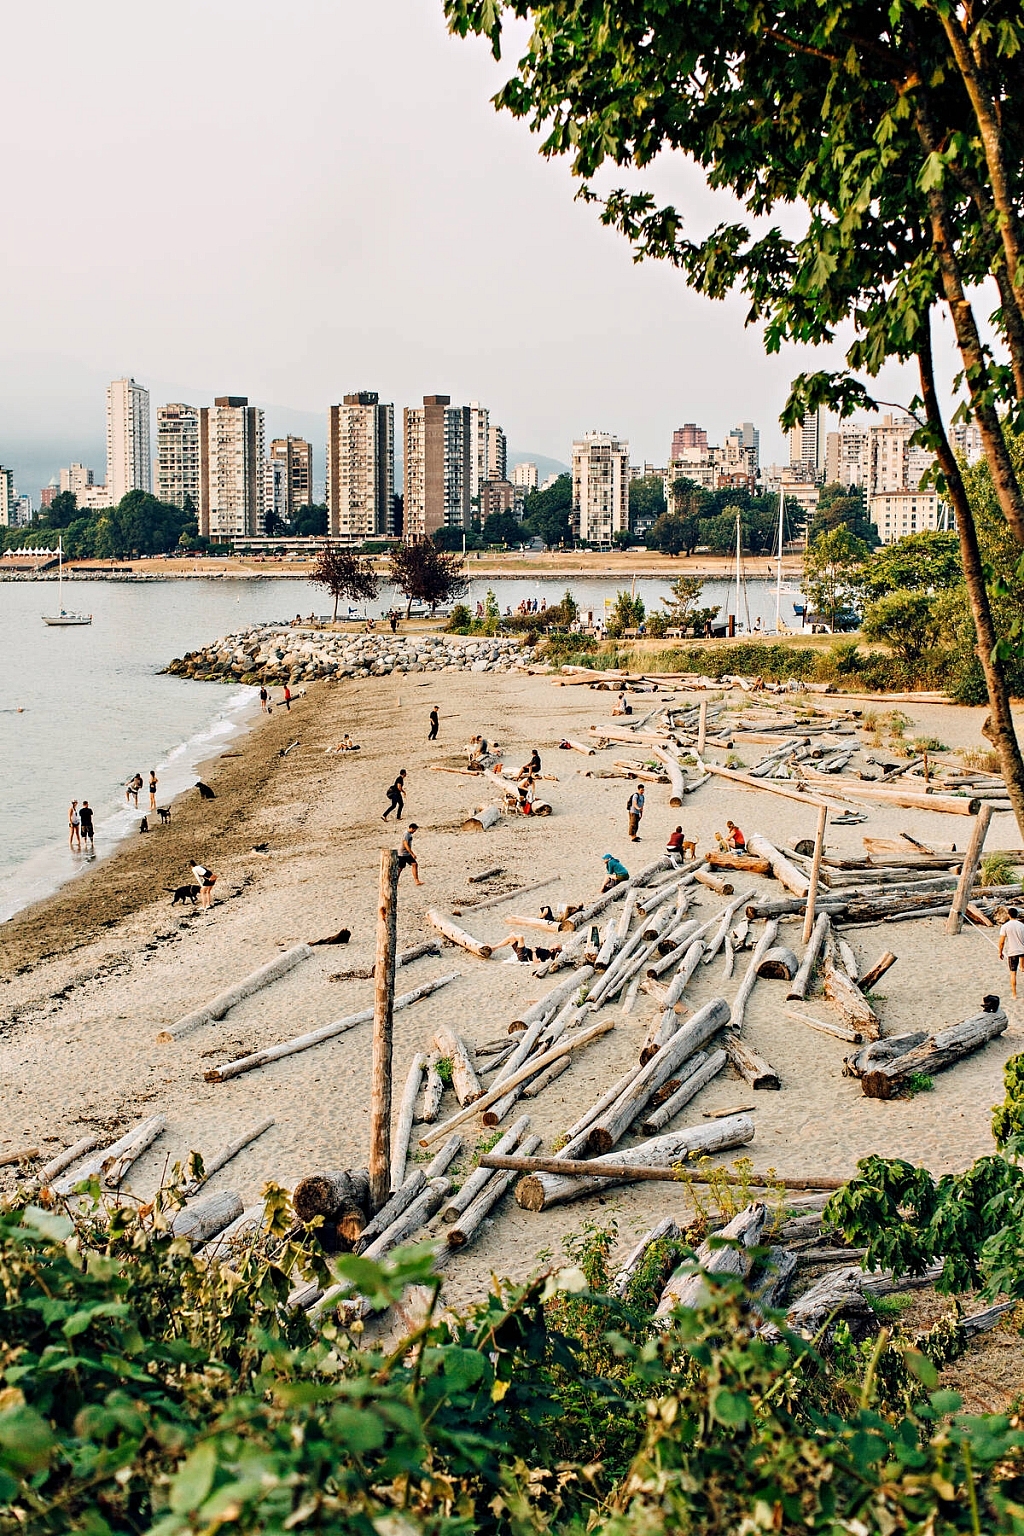 Sandy beach strewn with logs, the towers of downtown Vancouver in the background.